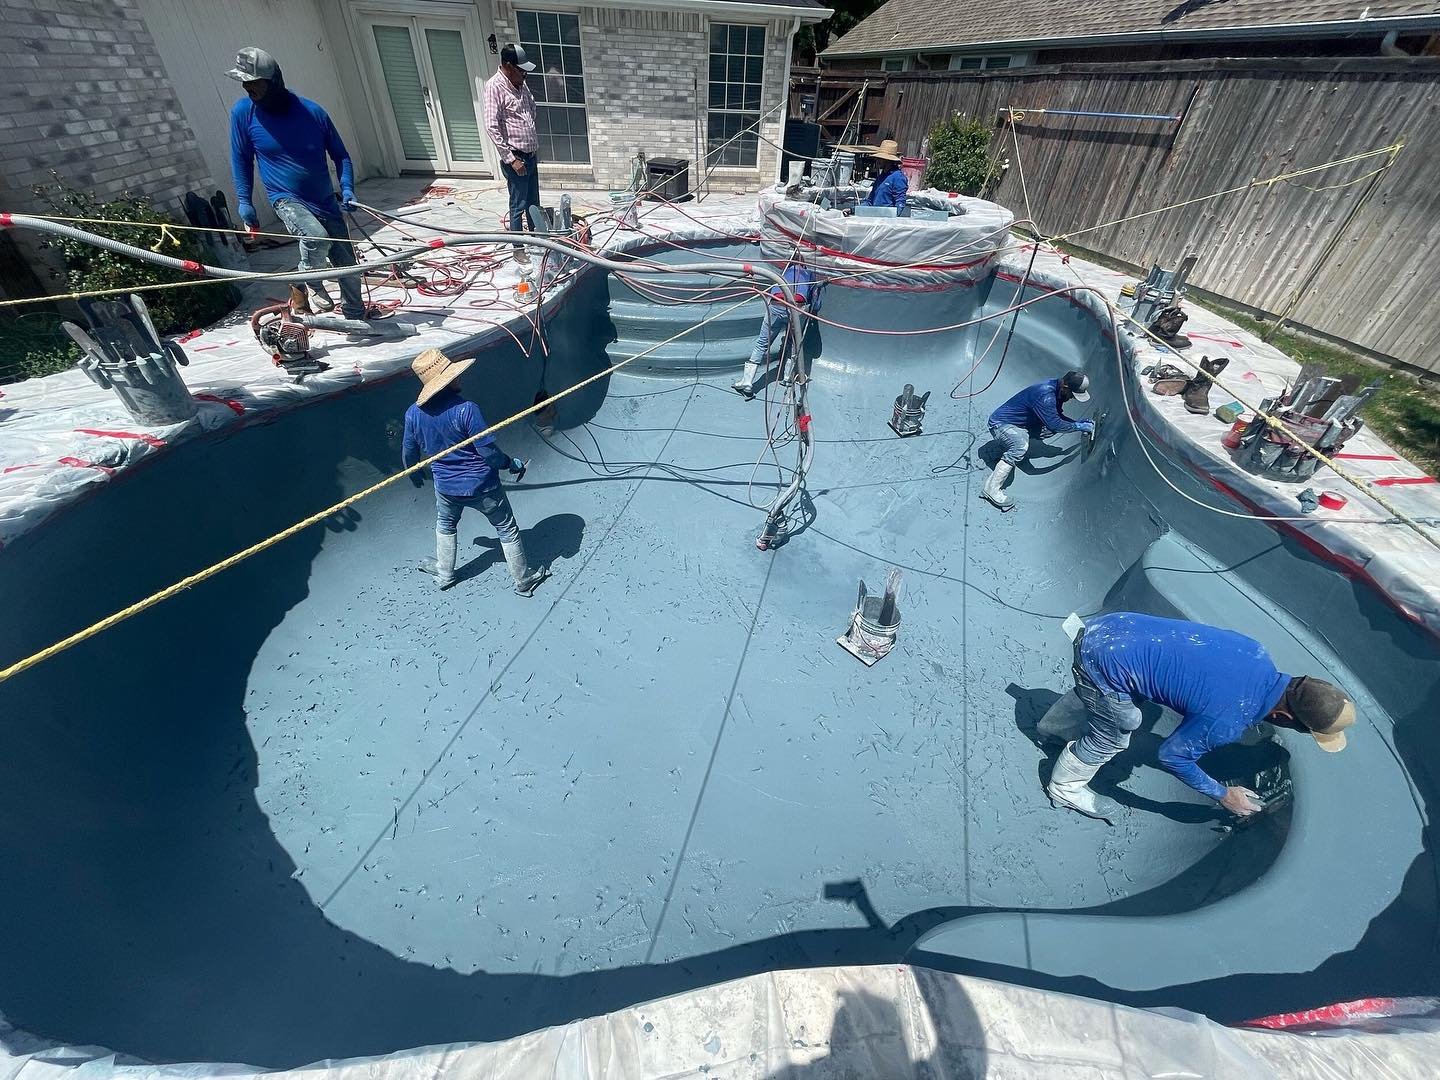 REPLASTER ✔️

Are you ready to replaster your pool? Or interested in other renovation options? Send us a message or call us at (972) 423-7178 to get started! 📞

#FoleyPools #pool #outdoorliving #pooldesign #construction #outdoorliving #renovation #p